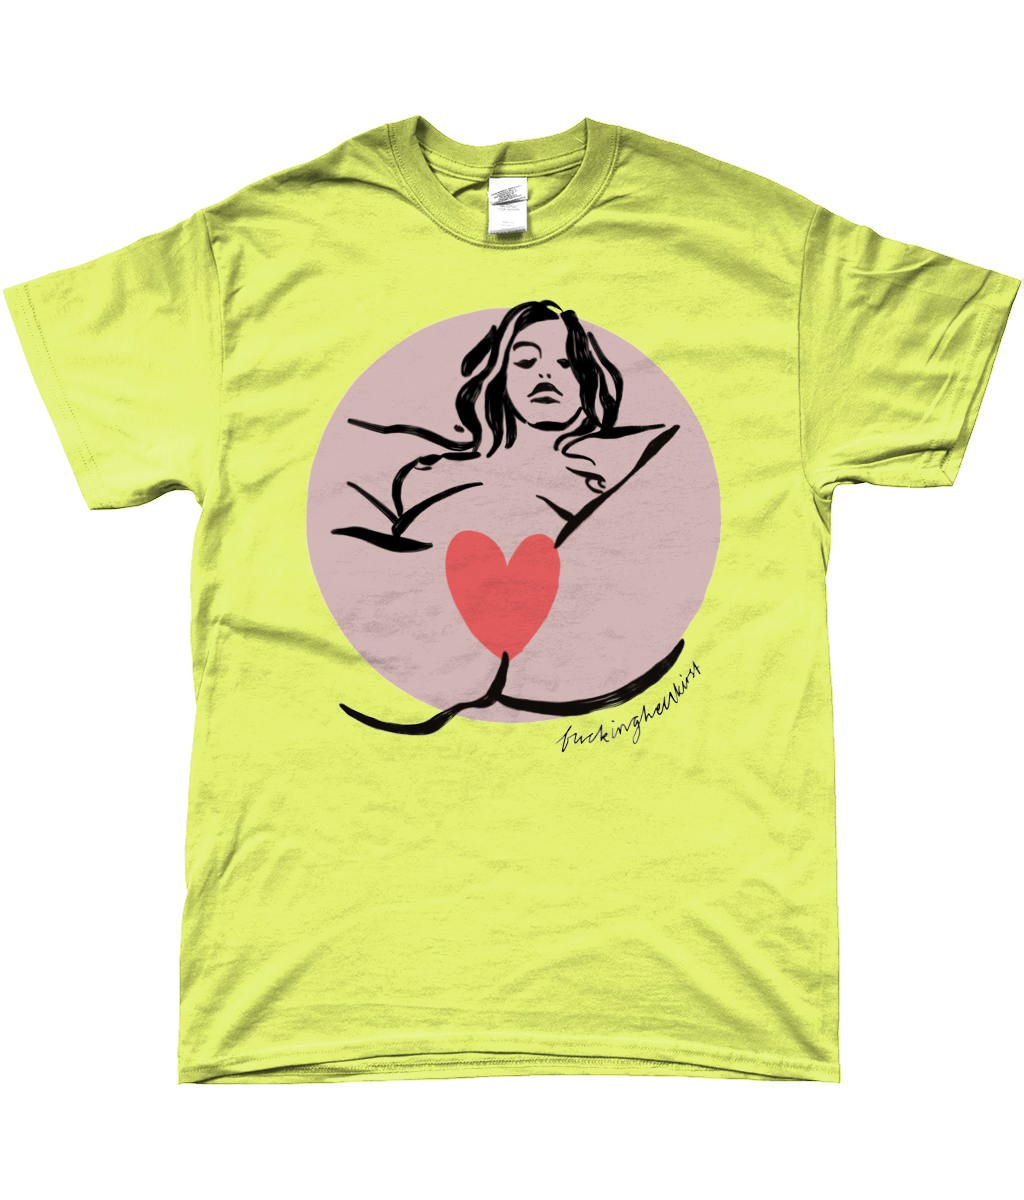 ON SALE!!! “PU$$Y LOVER